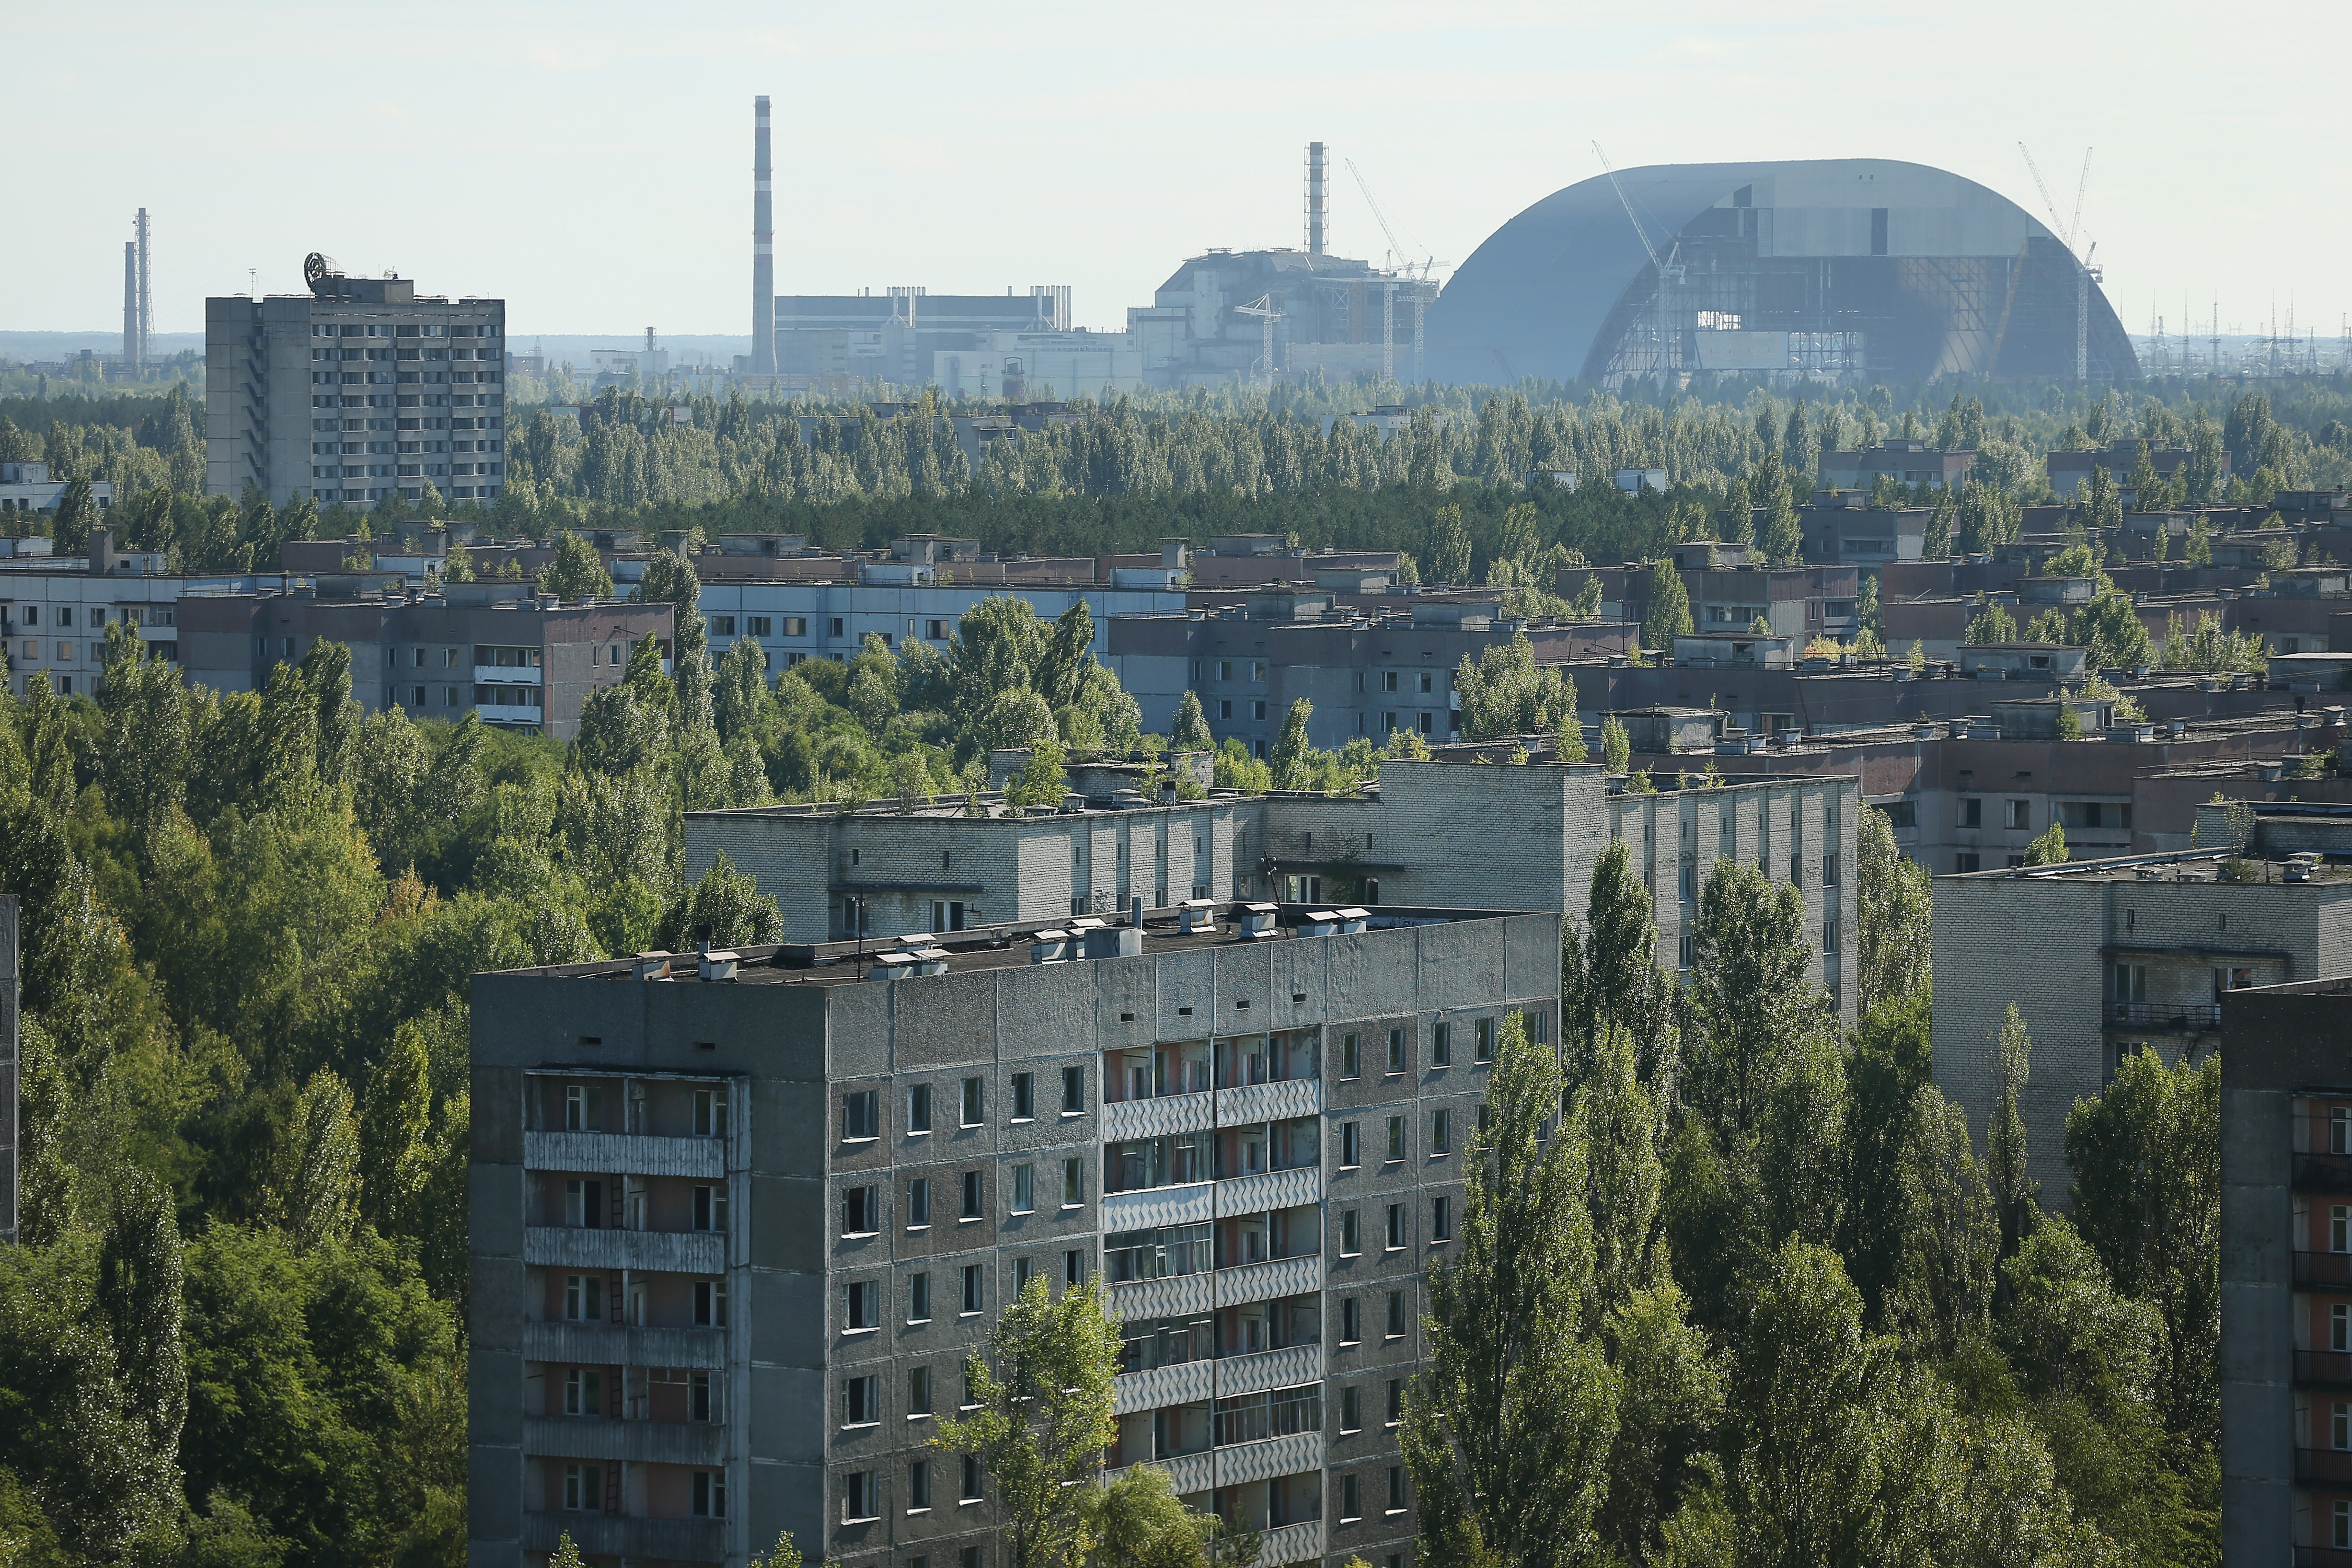 The former Chernobyl nuclear power plant, including destroyed reactor four (C), as well as the New Safe Confinement structure (R) that will one day enclose the remains of reactor four, stand behind the abandoned city of Pripyat.